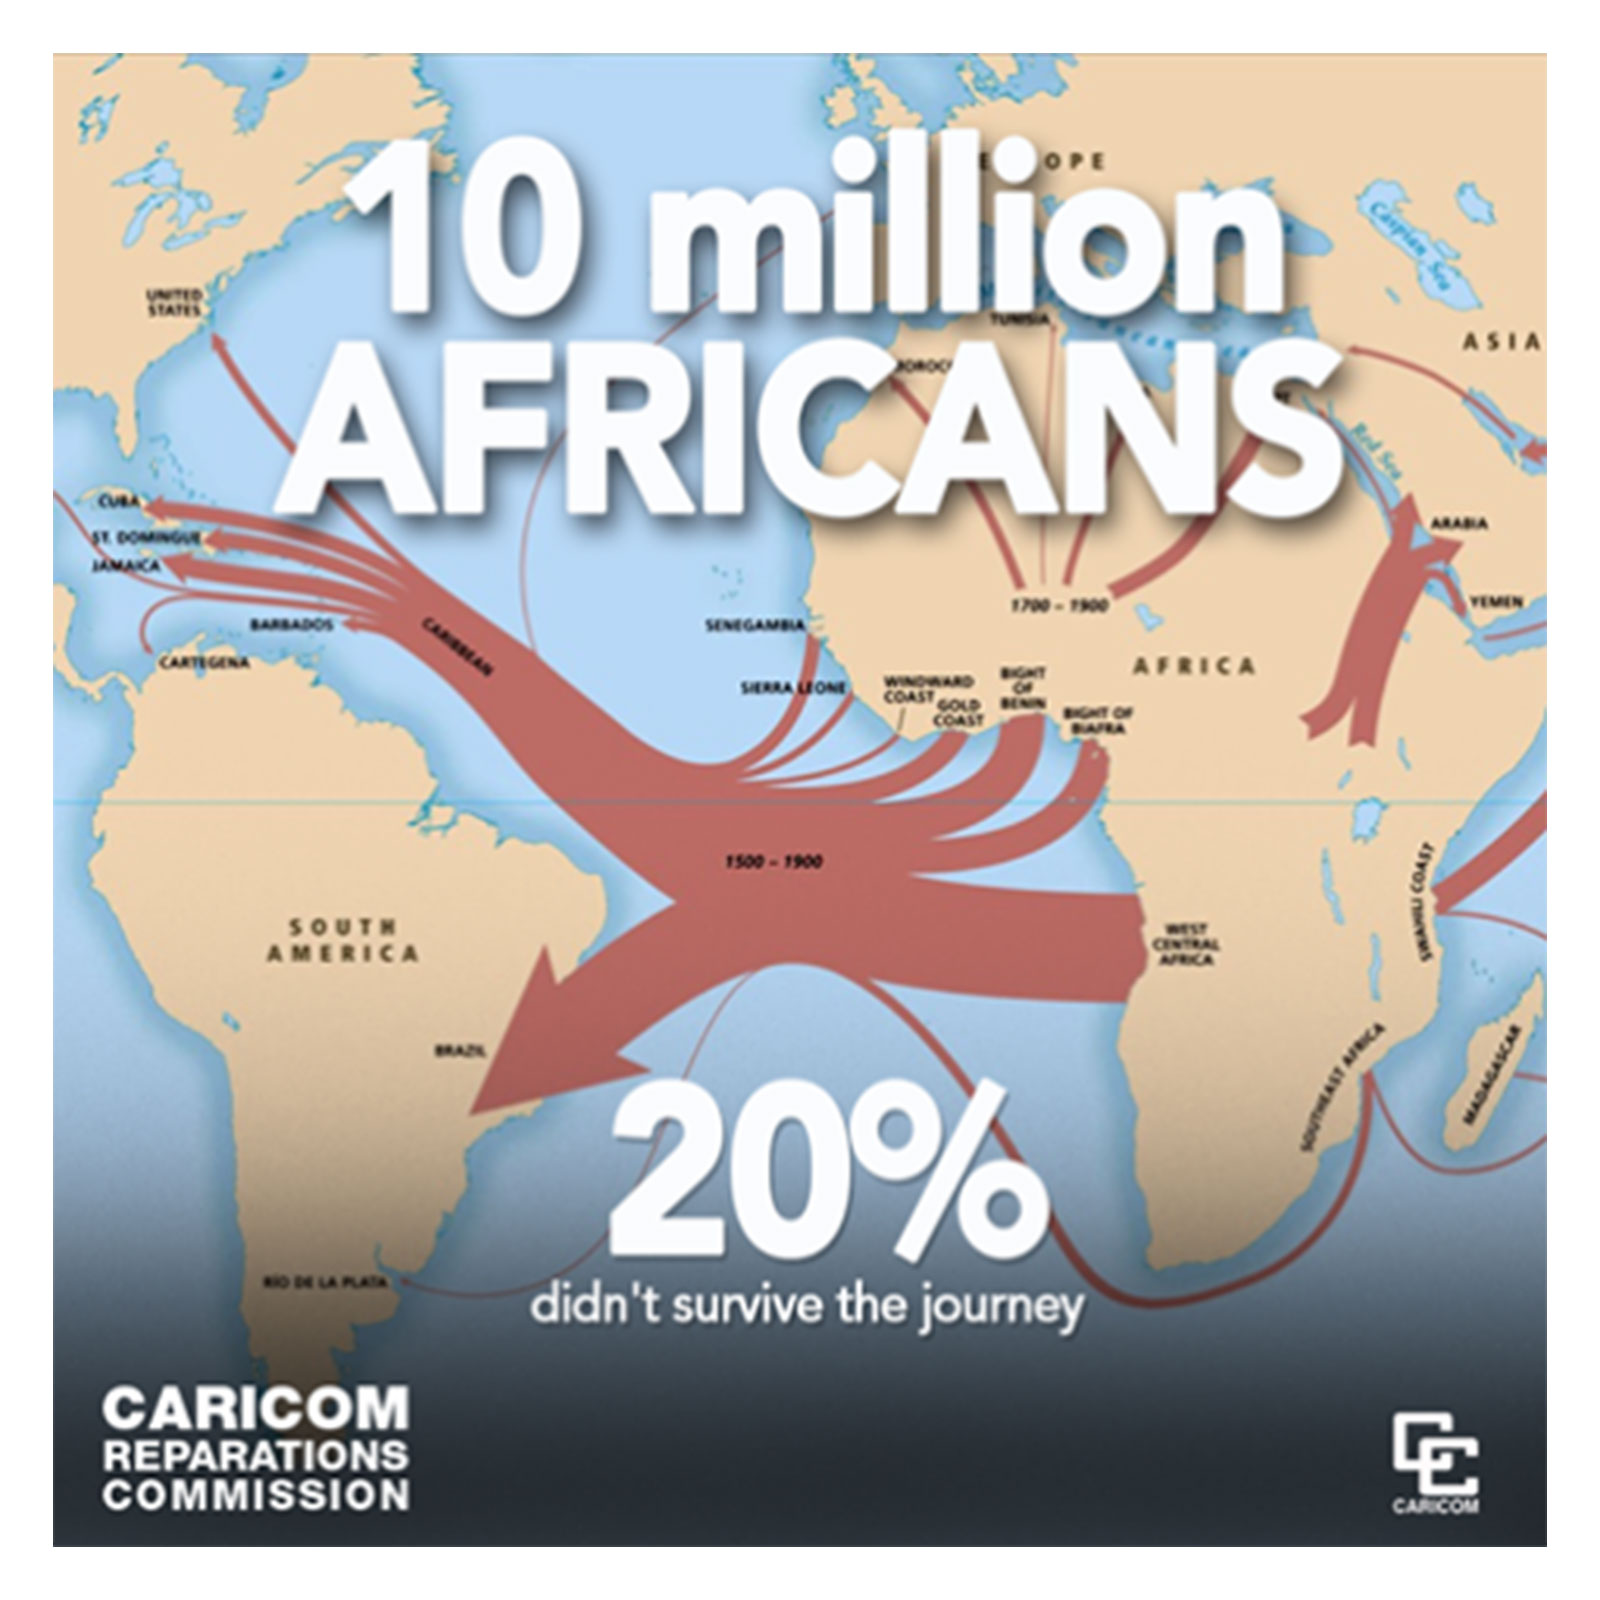 10 million Africans (20%) did not survive the journey - Graphic by CARICOM Reparations Commission